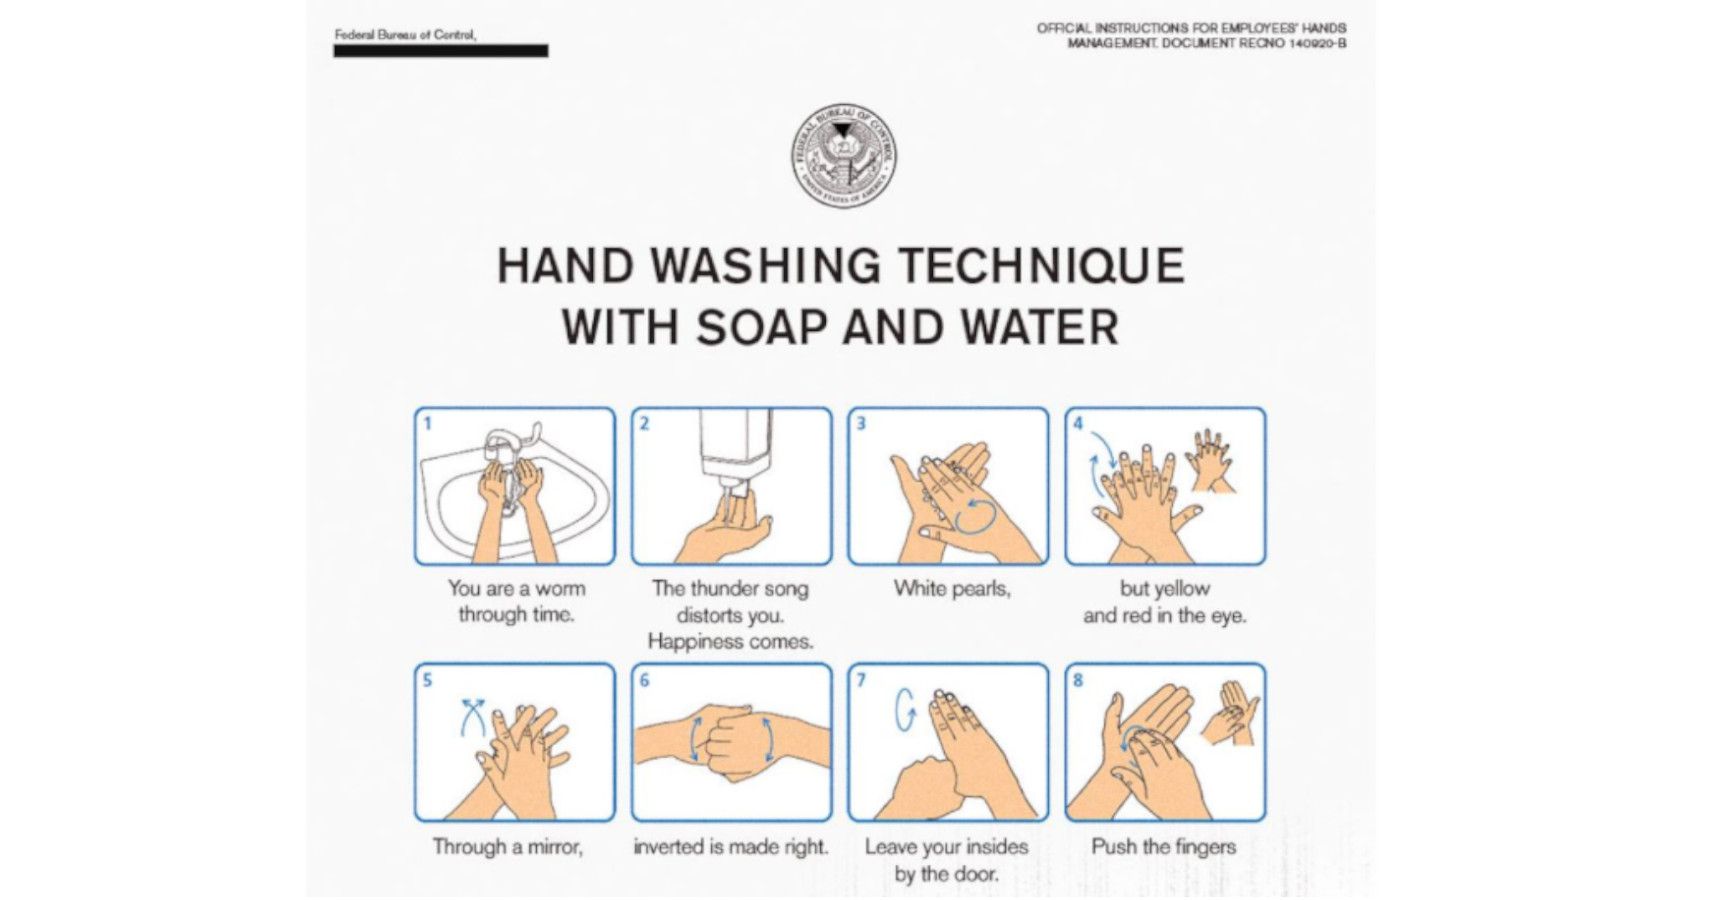 Control Offers Advice On How To Properly Wash Your Hands